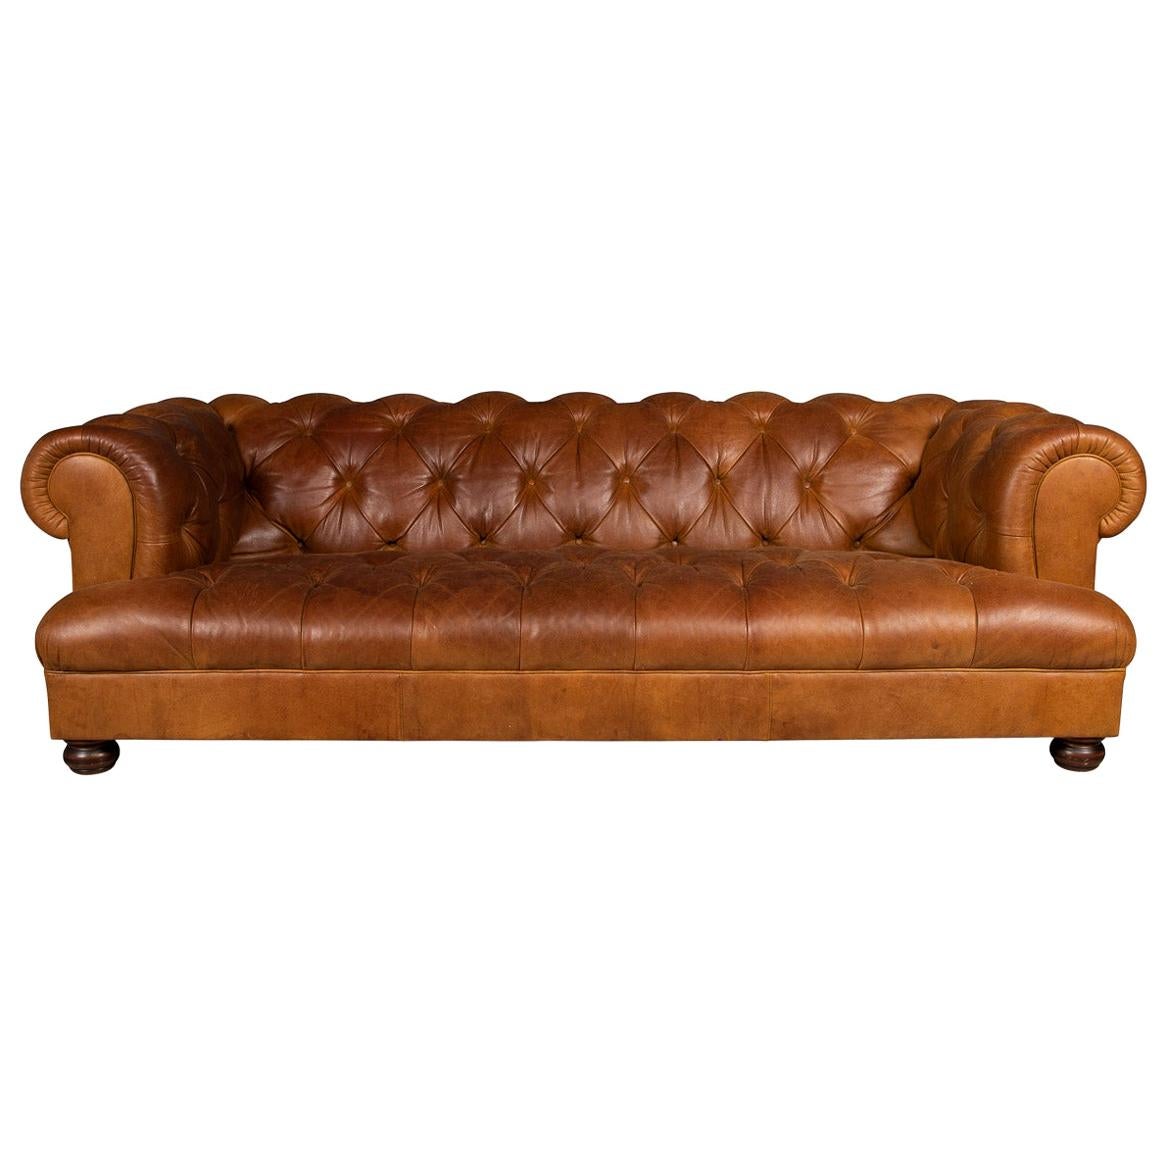 Late 20th Century 3-Seat Chesterfield Leather Sofa with Button Down Seat